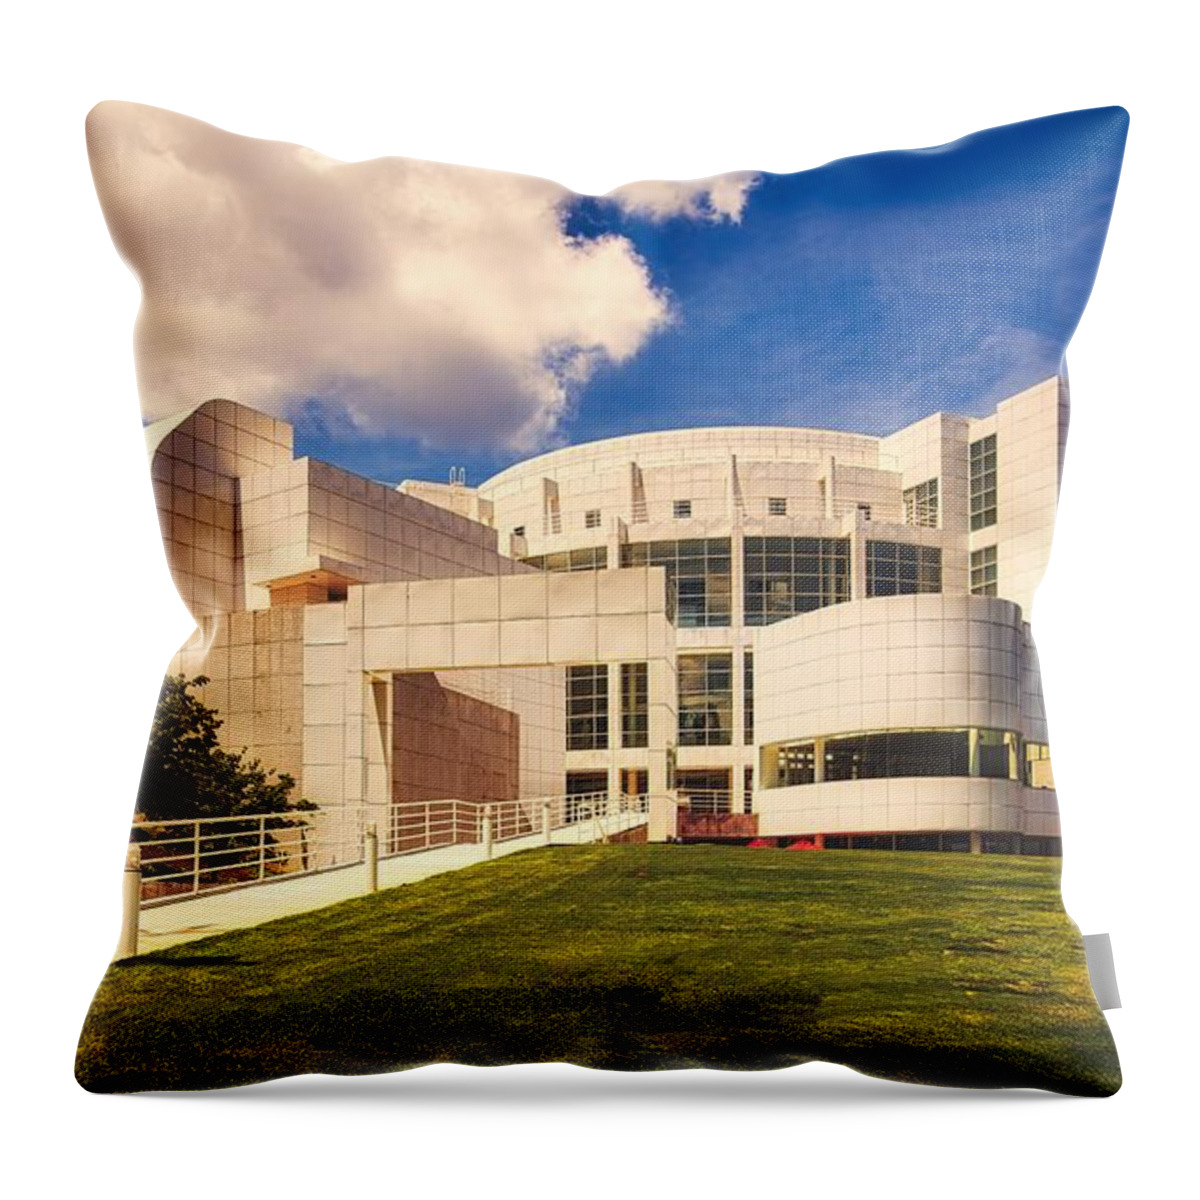 High Museum Of Art Throw Pillow featuring the photograph The High Museum Of Art - Atlanta, Georgia by Mountain Dreams